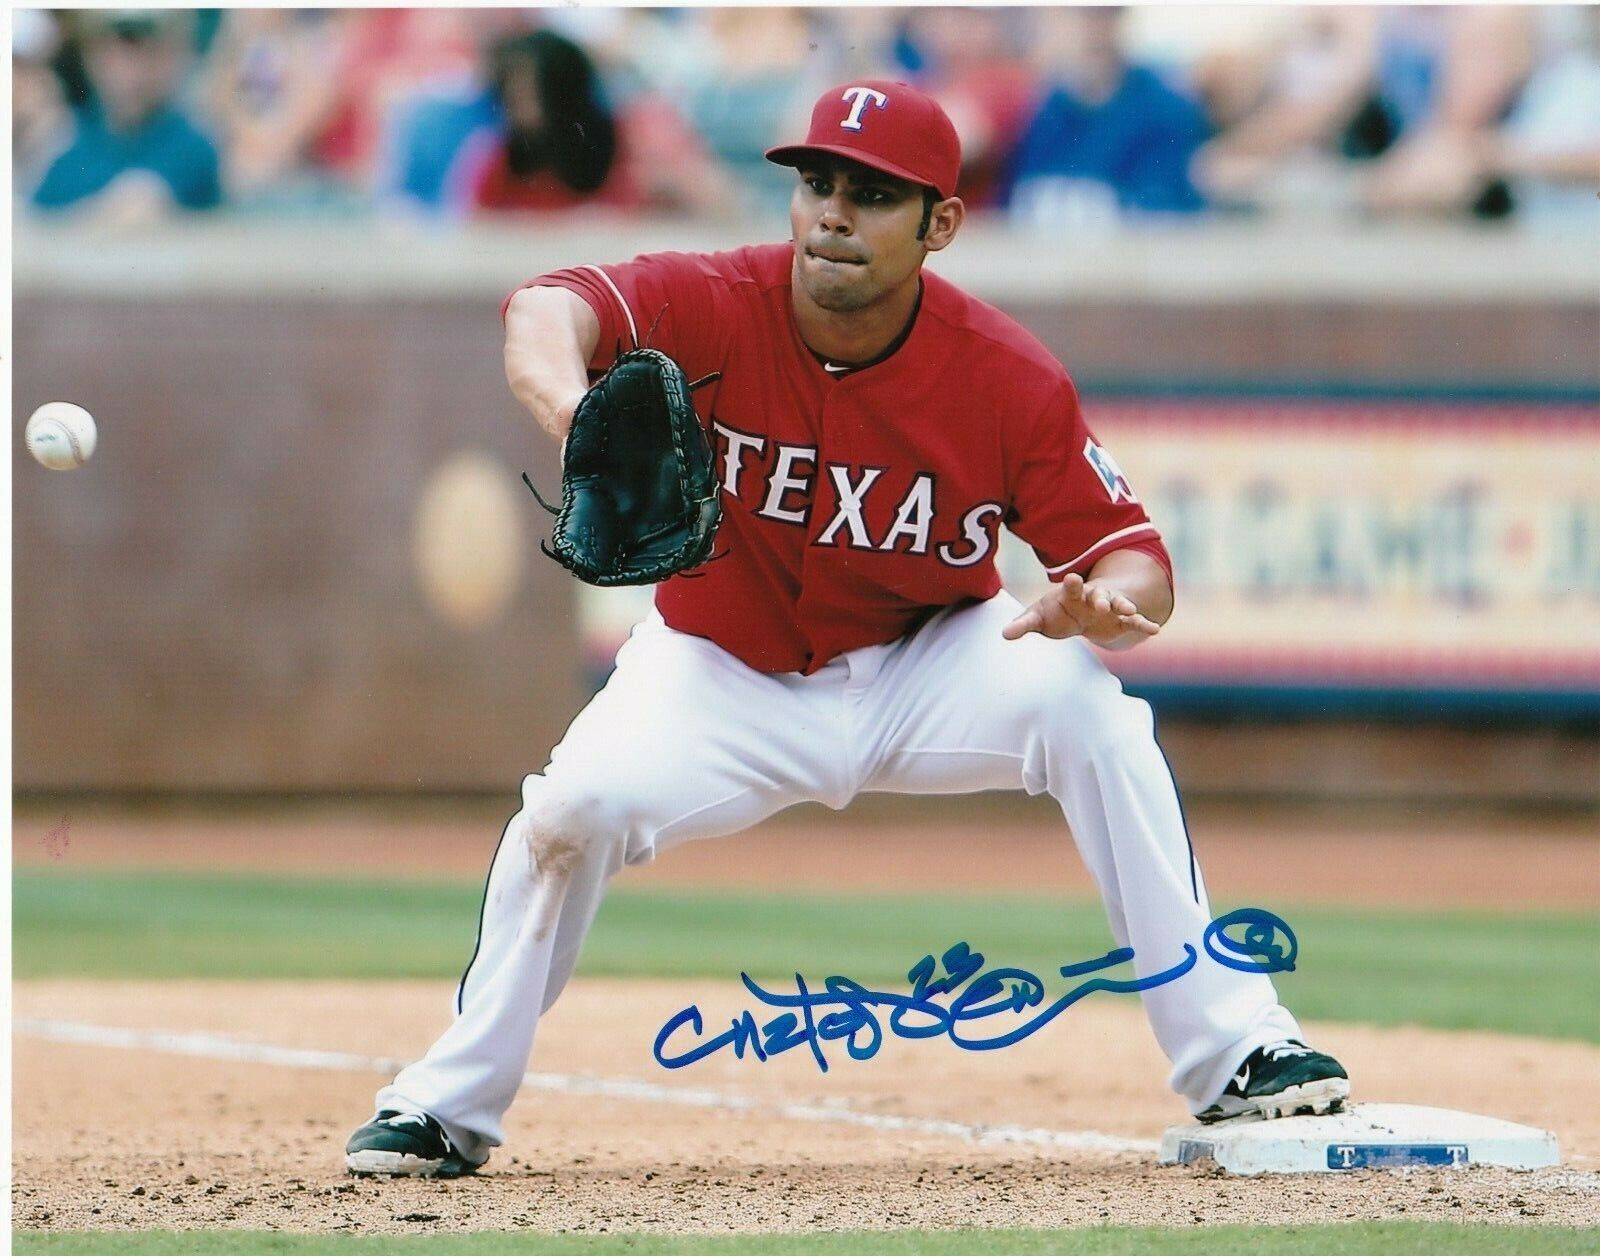 CARLOS PENA TEXAS RANGERS ACTION SIGNED 8x10